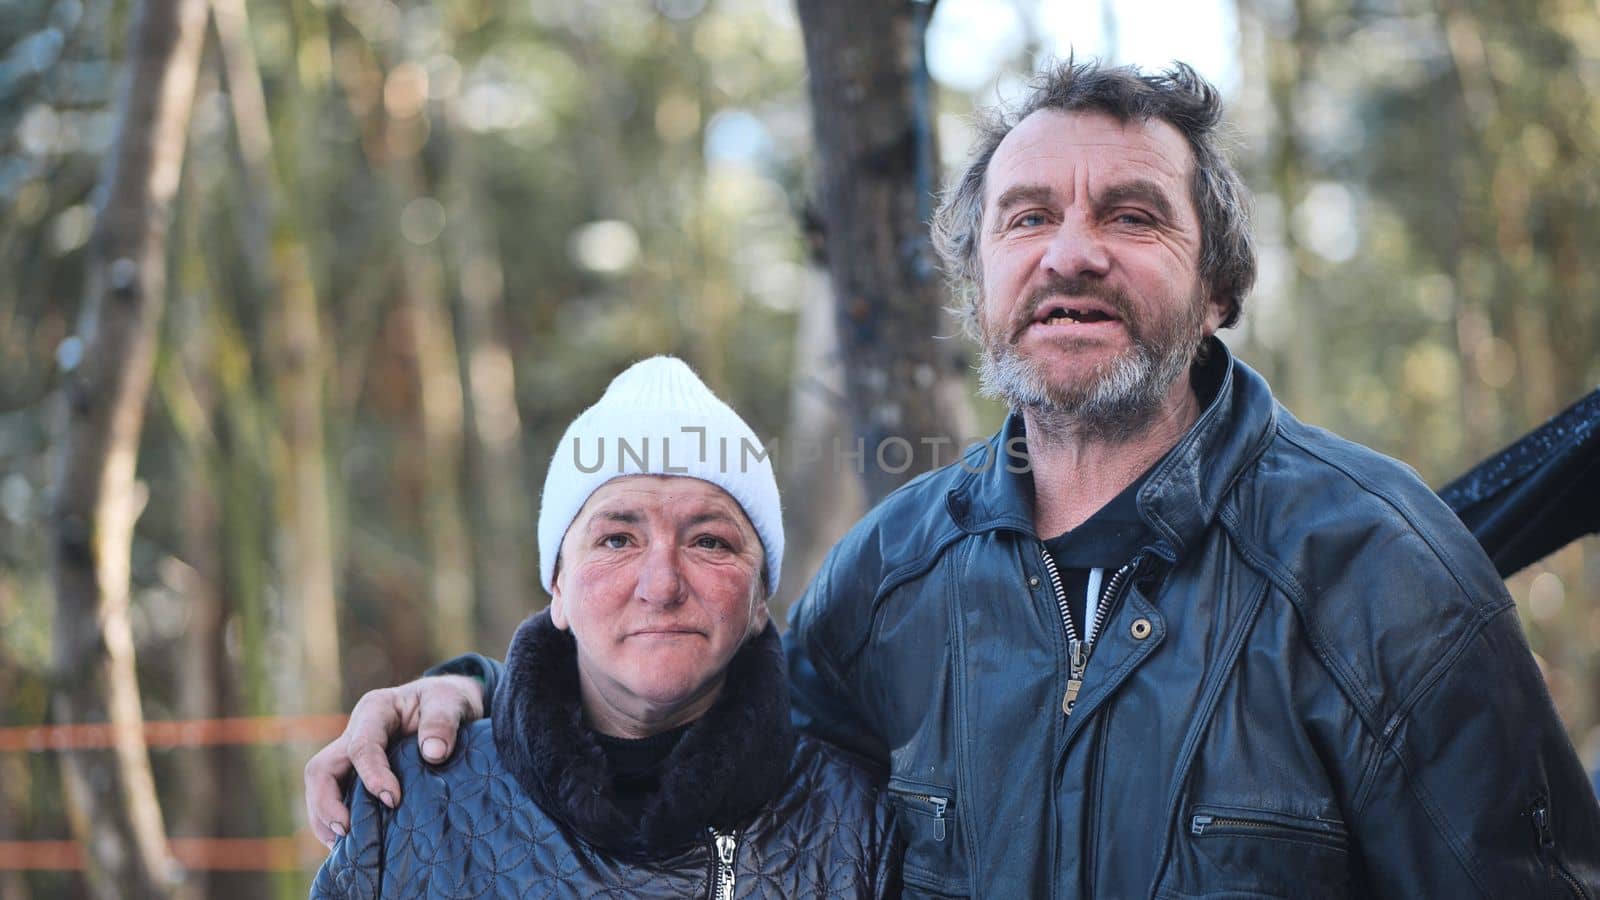 Homeless people are interviewed in the winter in the woods. by DovidPro